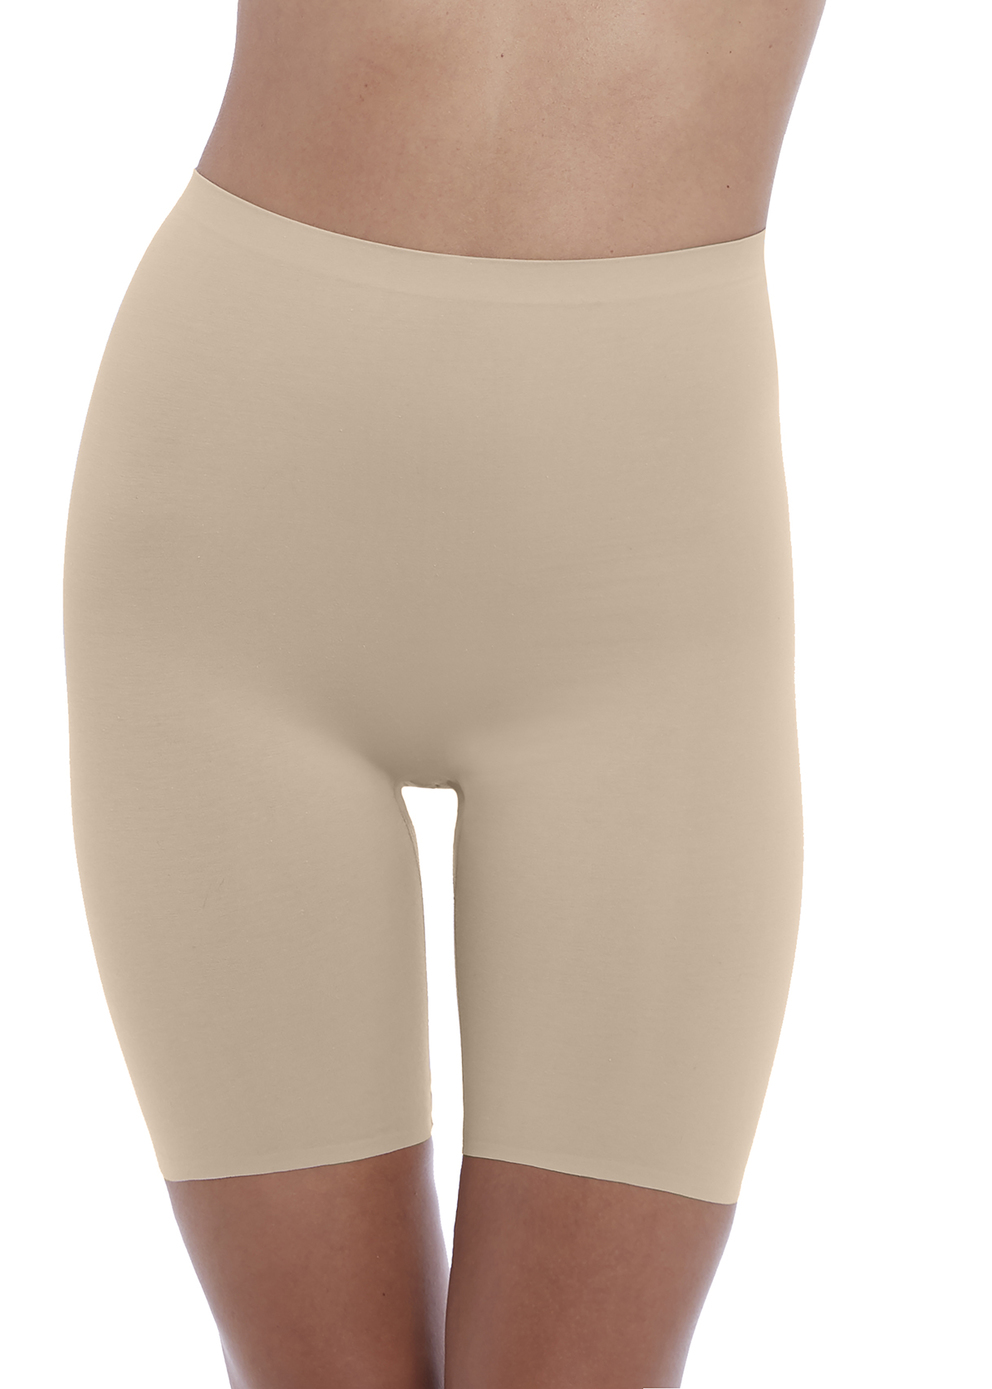 Beyond Naked Shapewear Sand Thigh from Wacoal